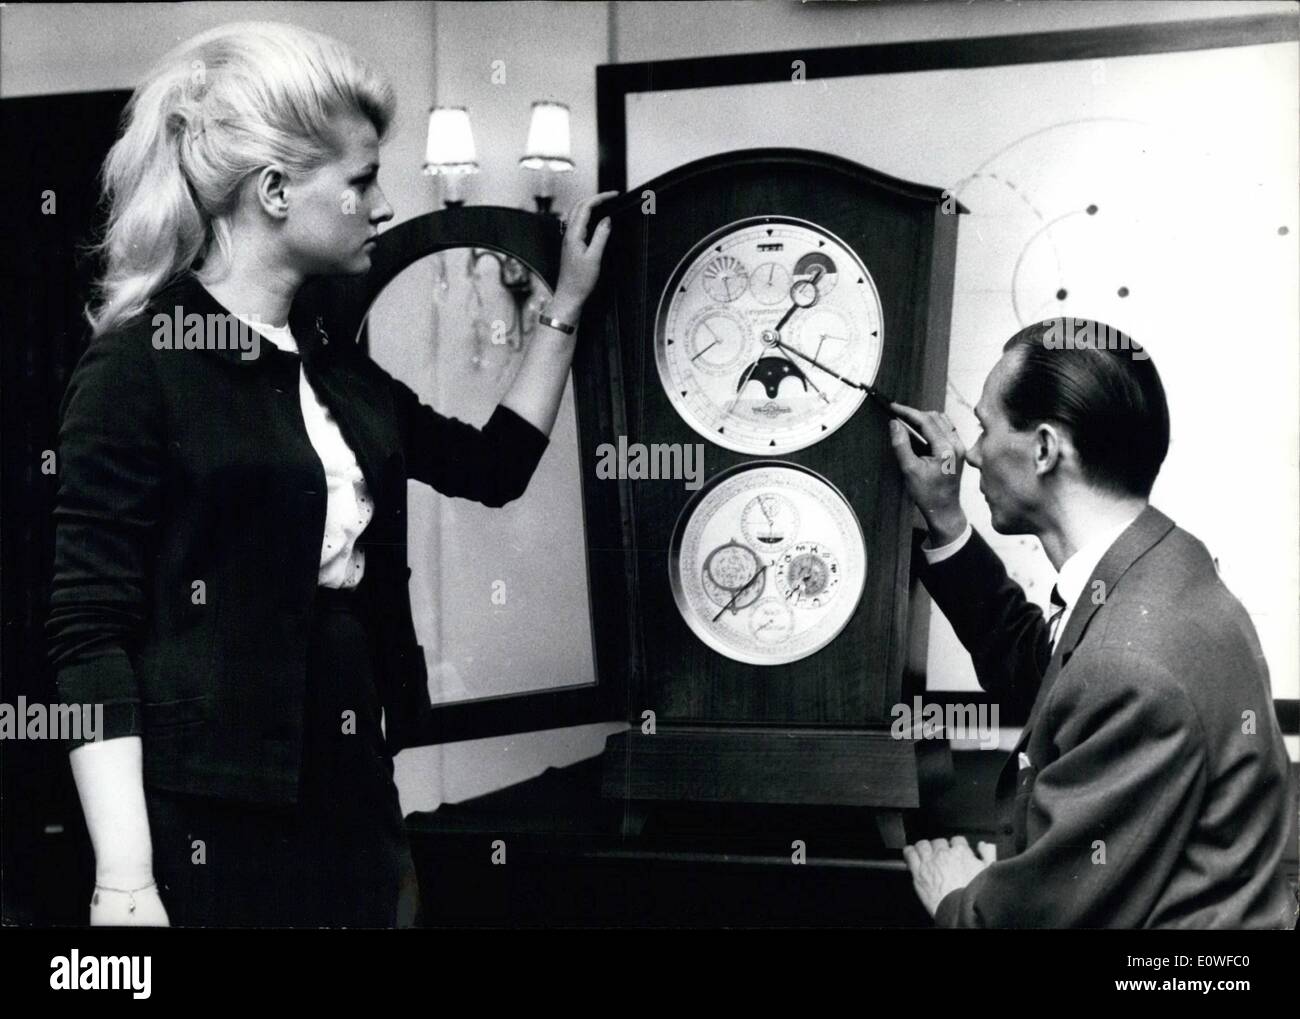 Aug. 08, 1962 - An astronomic watch with world calendar... has been built by watchmaker Hans Lang (right) from Essen Germany. He needed 3500 hours of work and about 30000 Marks to finish his work. Besides the normal time the 84 cm high watch holds dials for star time, gregorian calendar, world calendar as planned by UNESCO, sun, moon and other astronomic detauls. Lang srted his work in Dresden 1953. In 1958 he fled to western Germany, taking along the parts of the watch which was ready in 1961. Stock Photo